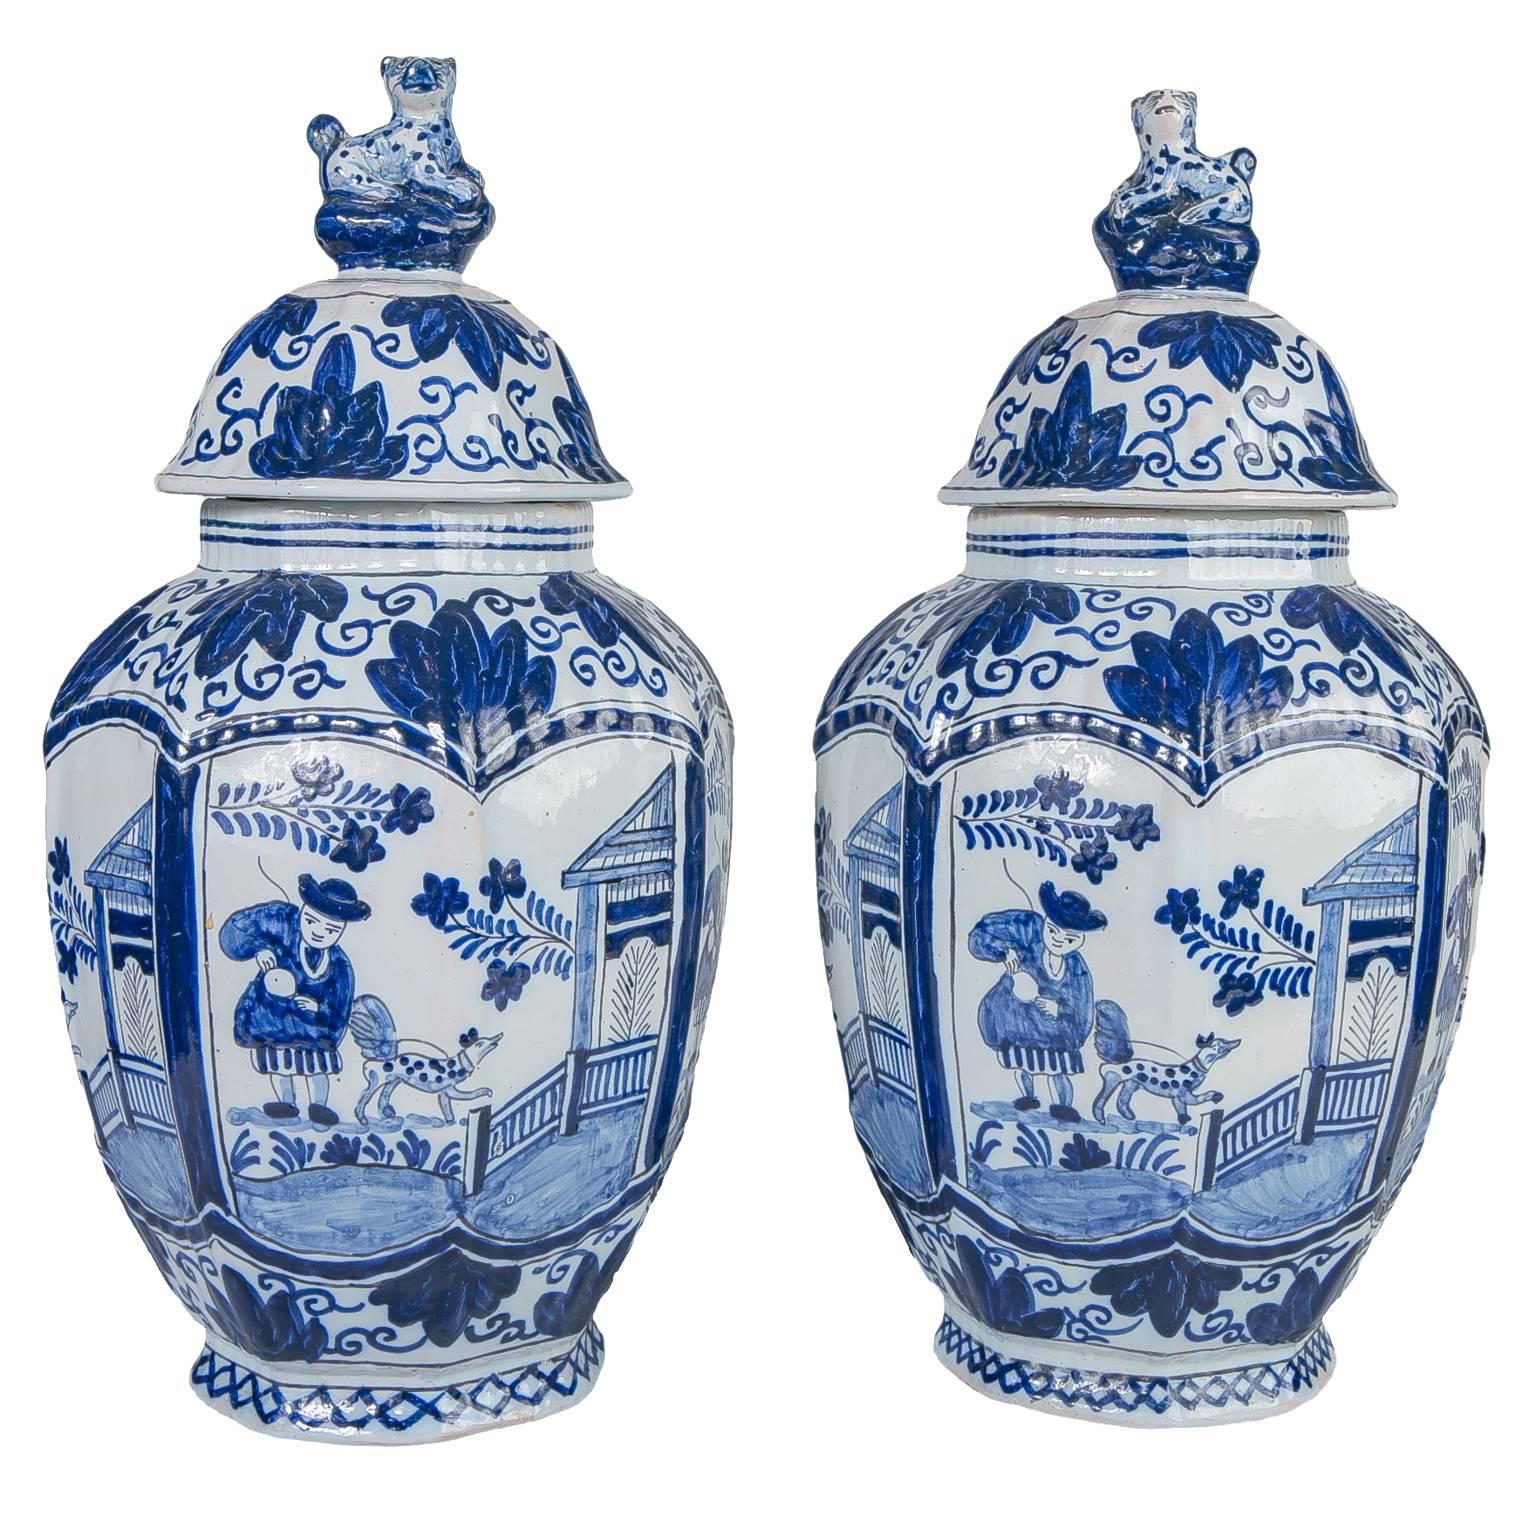 Blue and White Delft Jars Pair